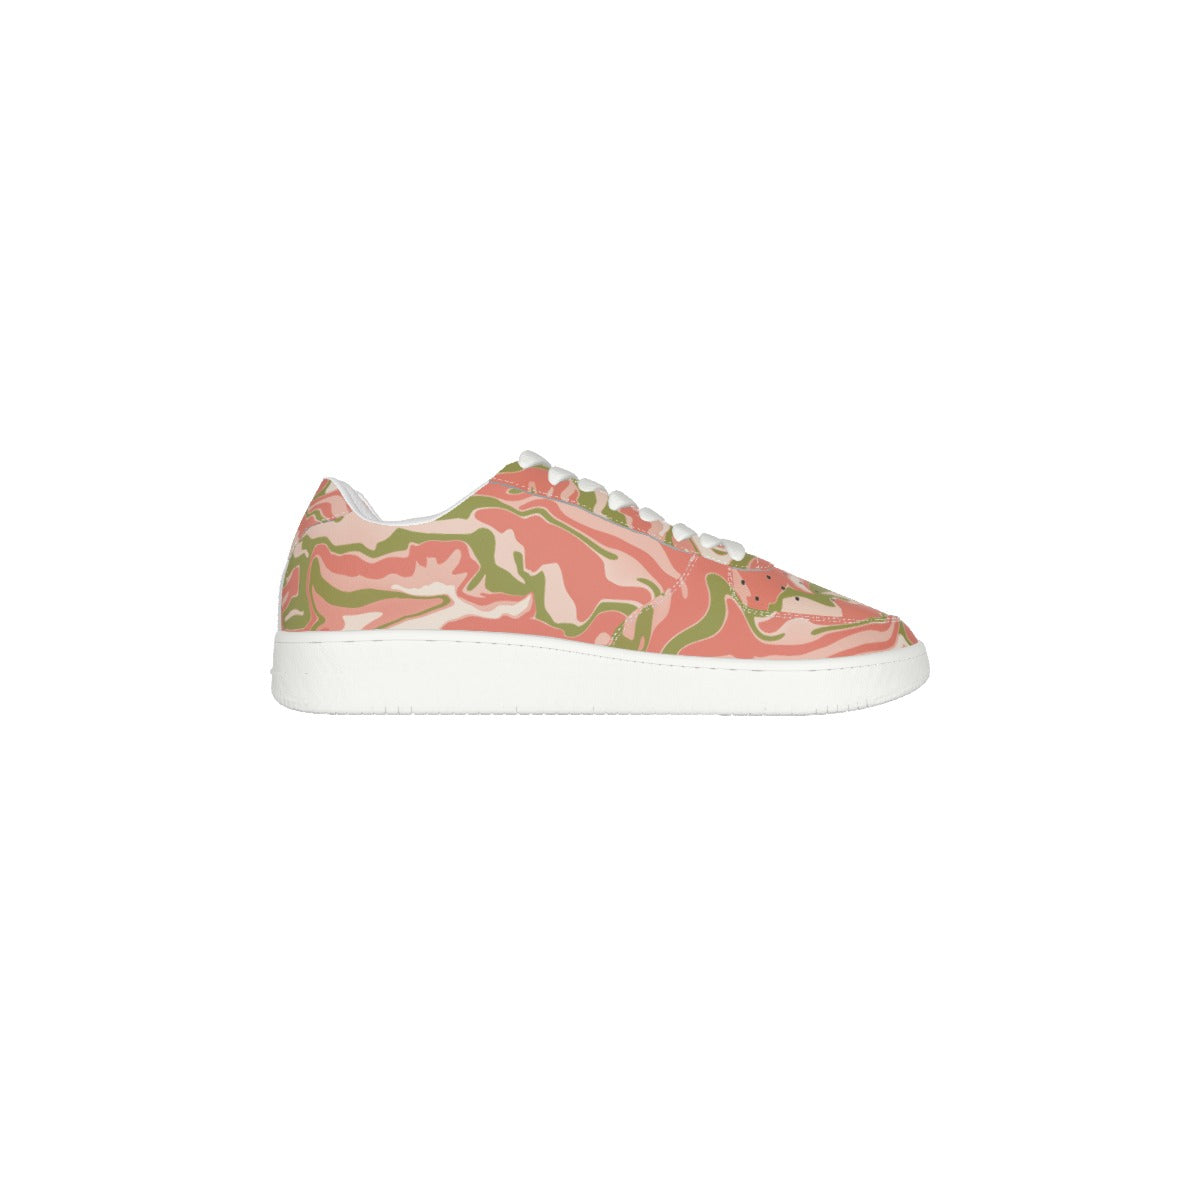 Coral Pink Unisex Shoes - kayzers